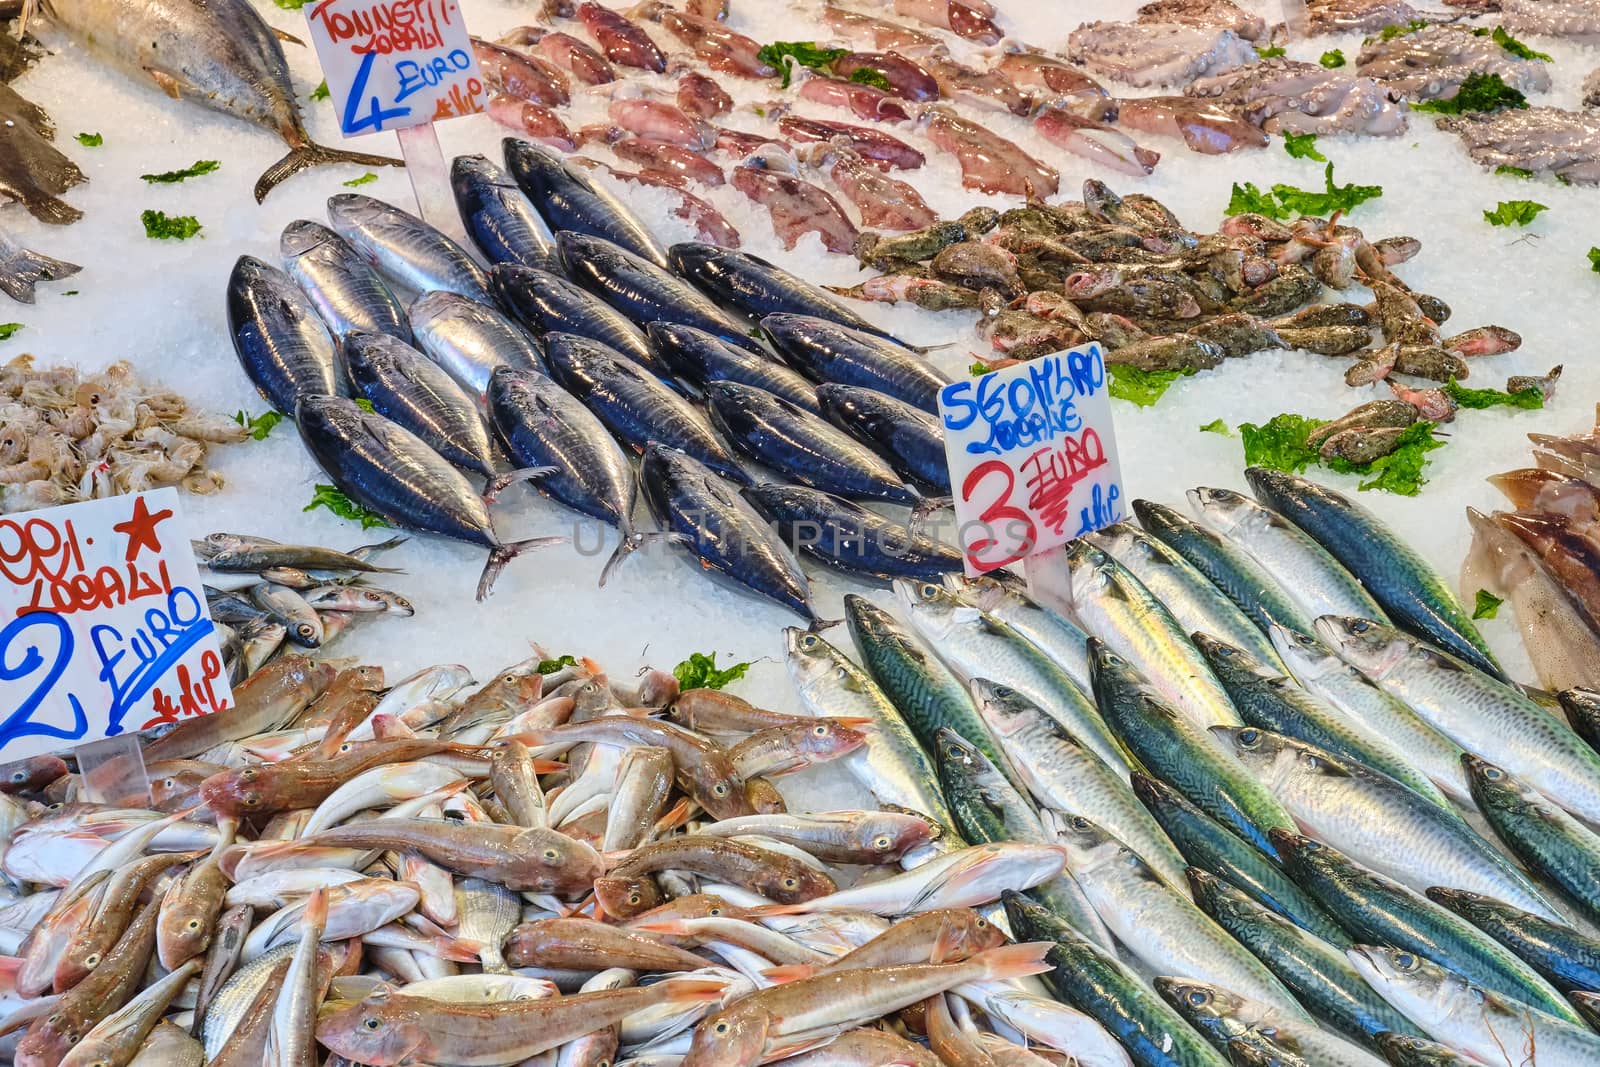 Fresh fish and seafood on display at a market